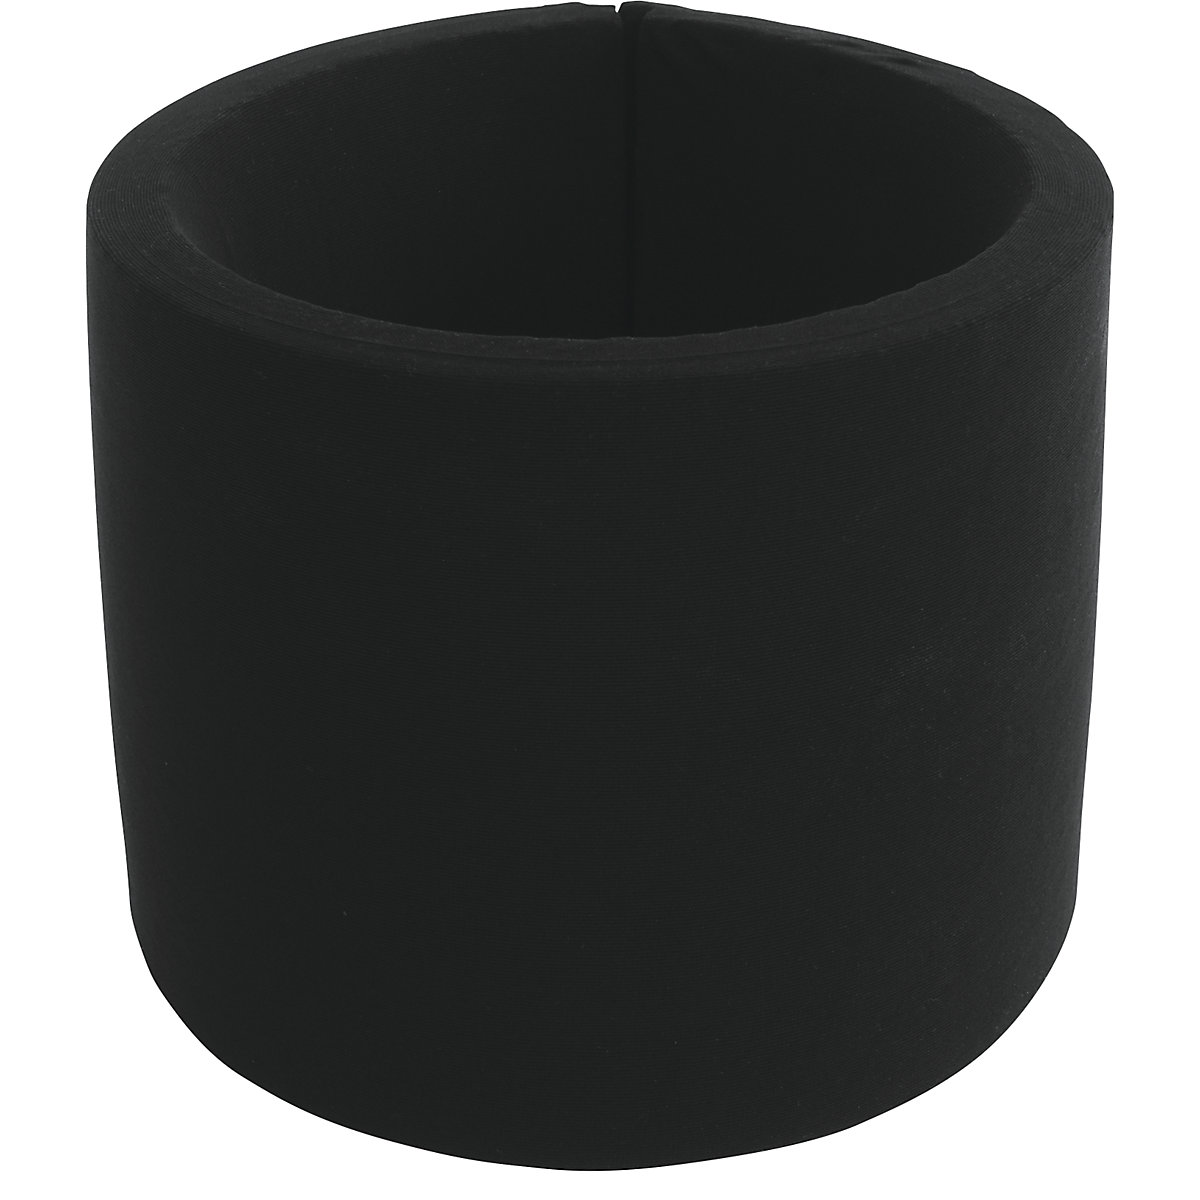 Activated carbon filter insert - IDEAL